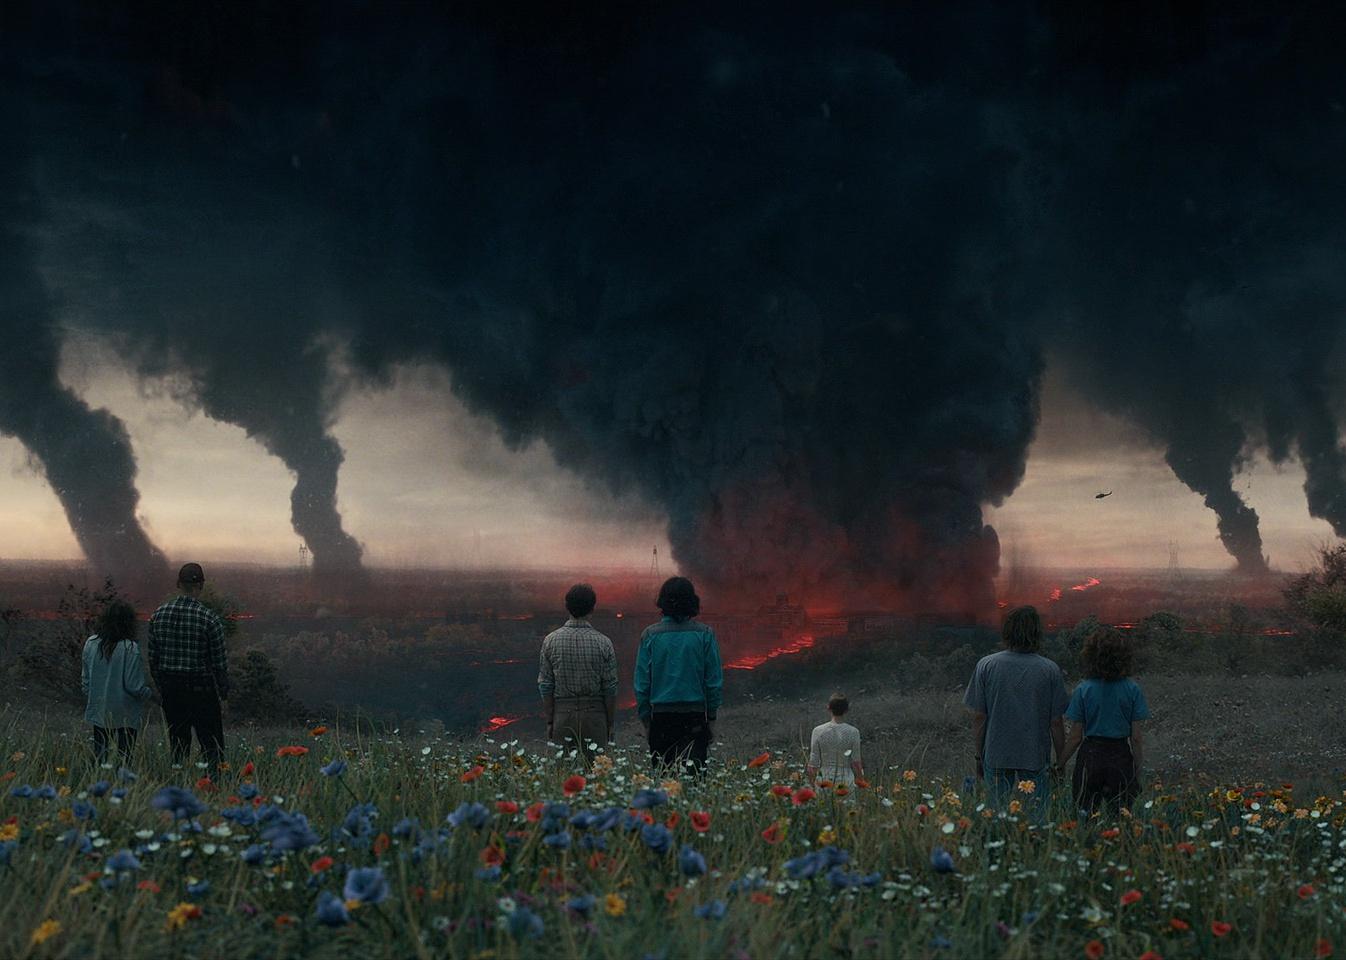 Kids standing on a hillside of wildflowers watching everything burn in the distance.